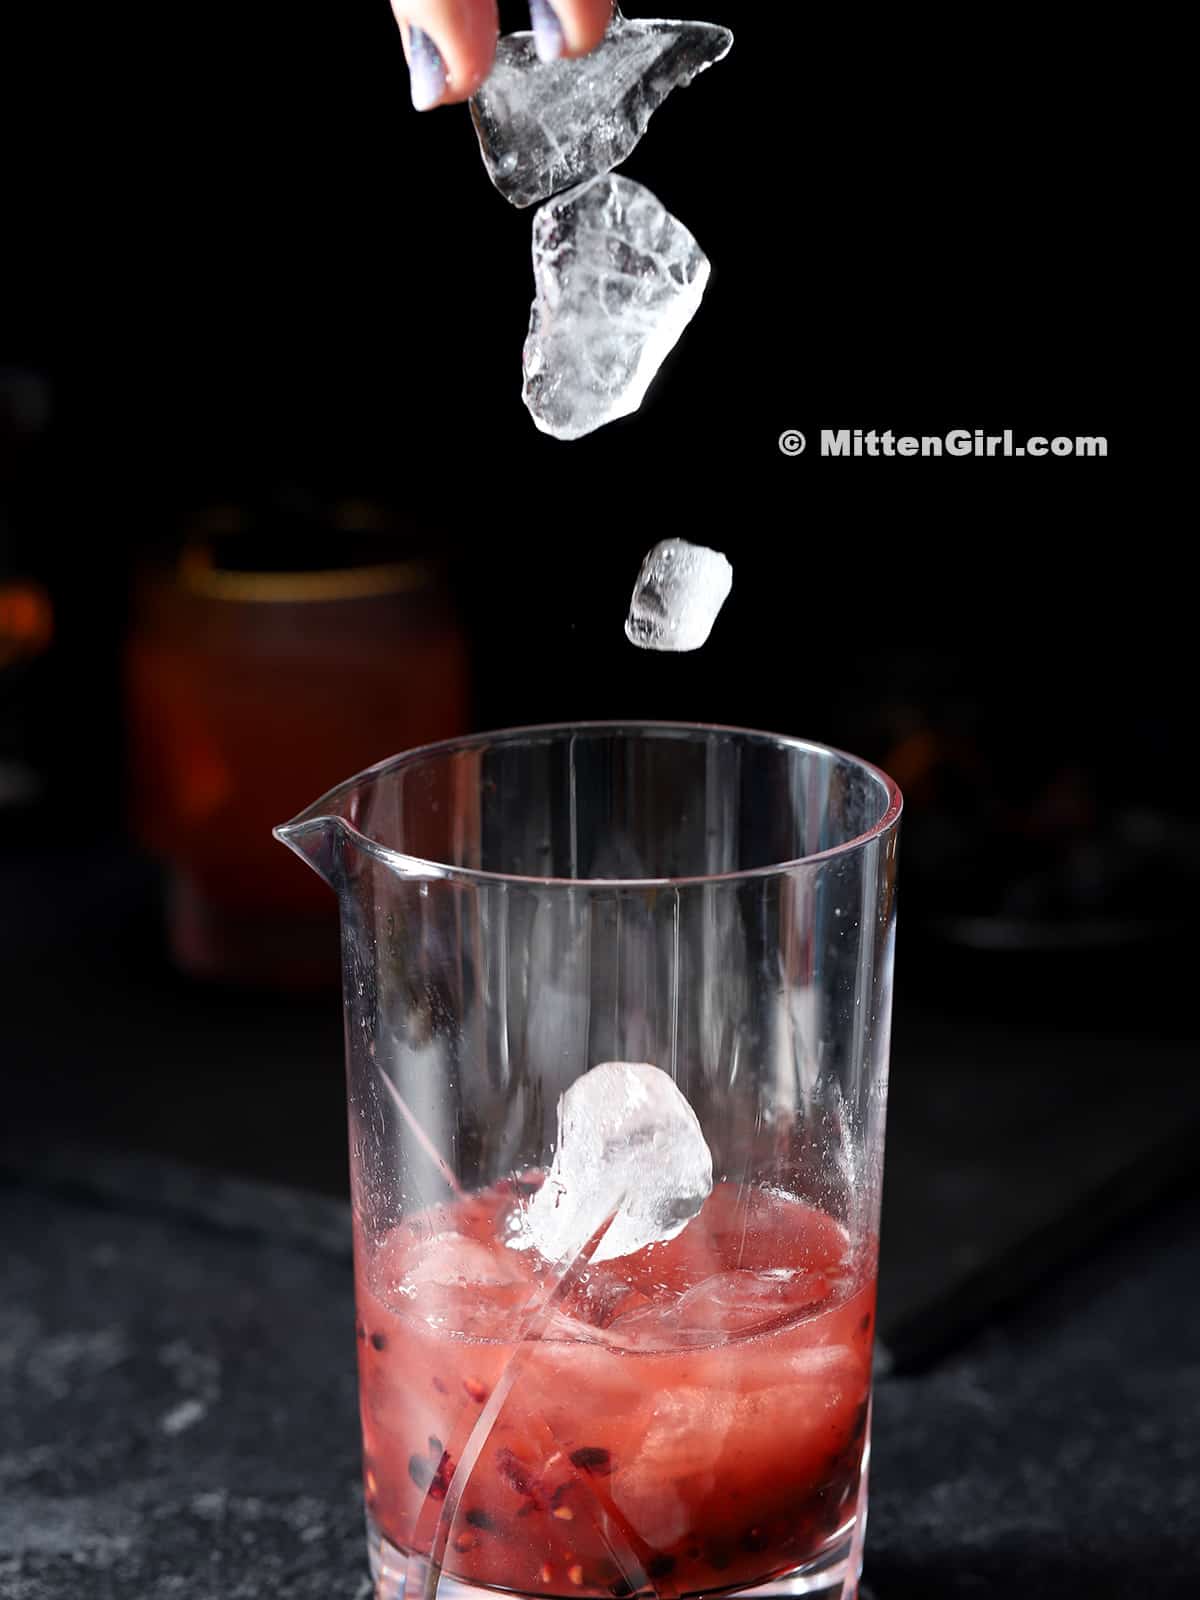 Ice falling into a mixing glass with cocktail.